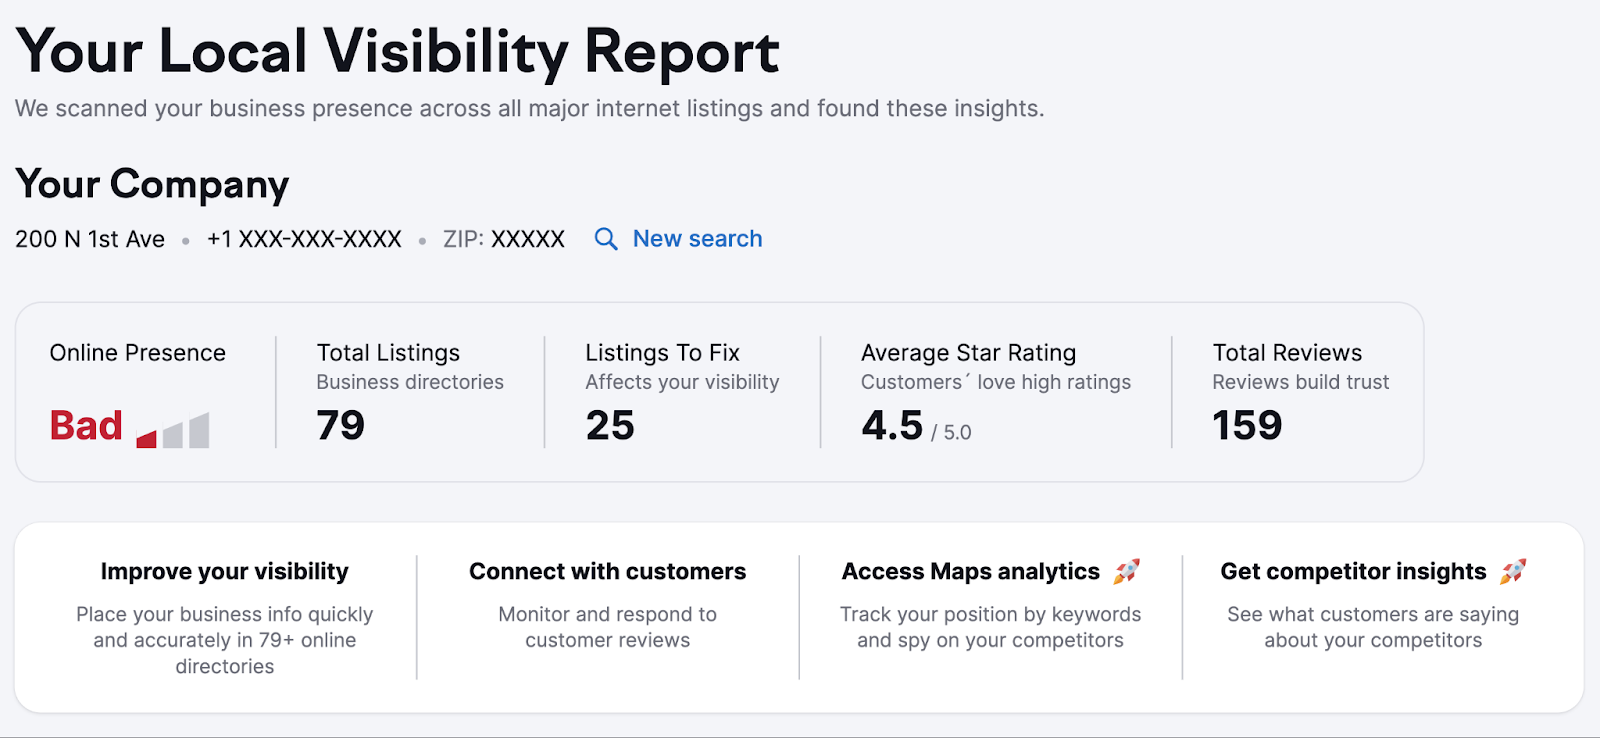 Local Visibility Report overview